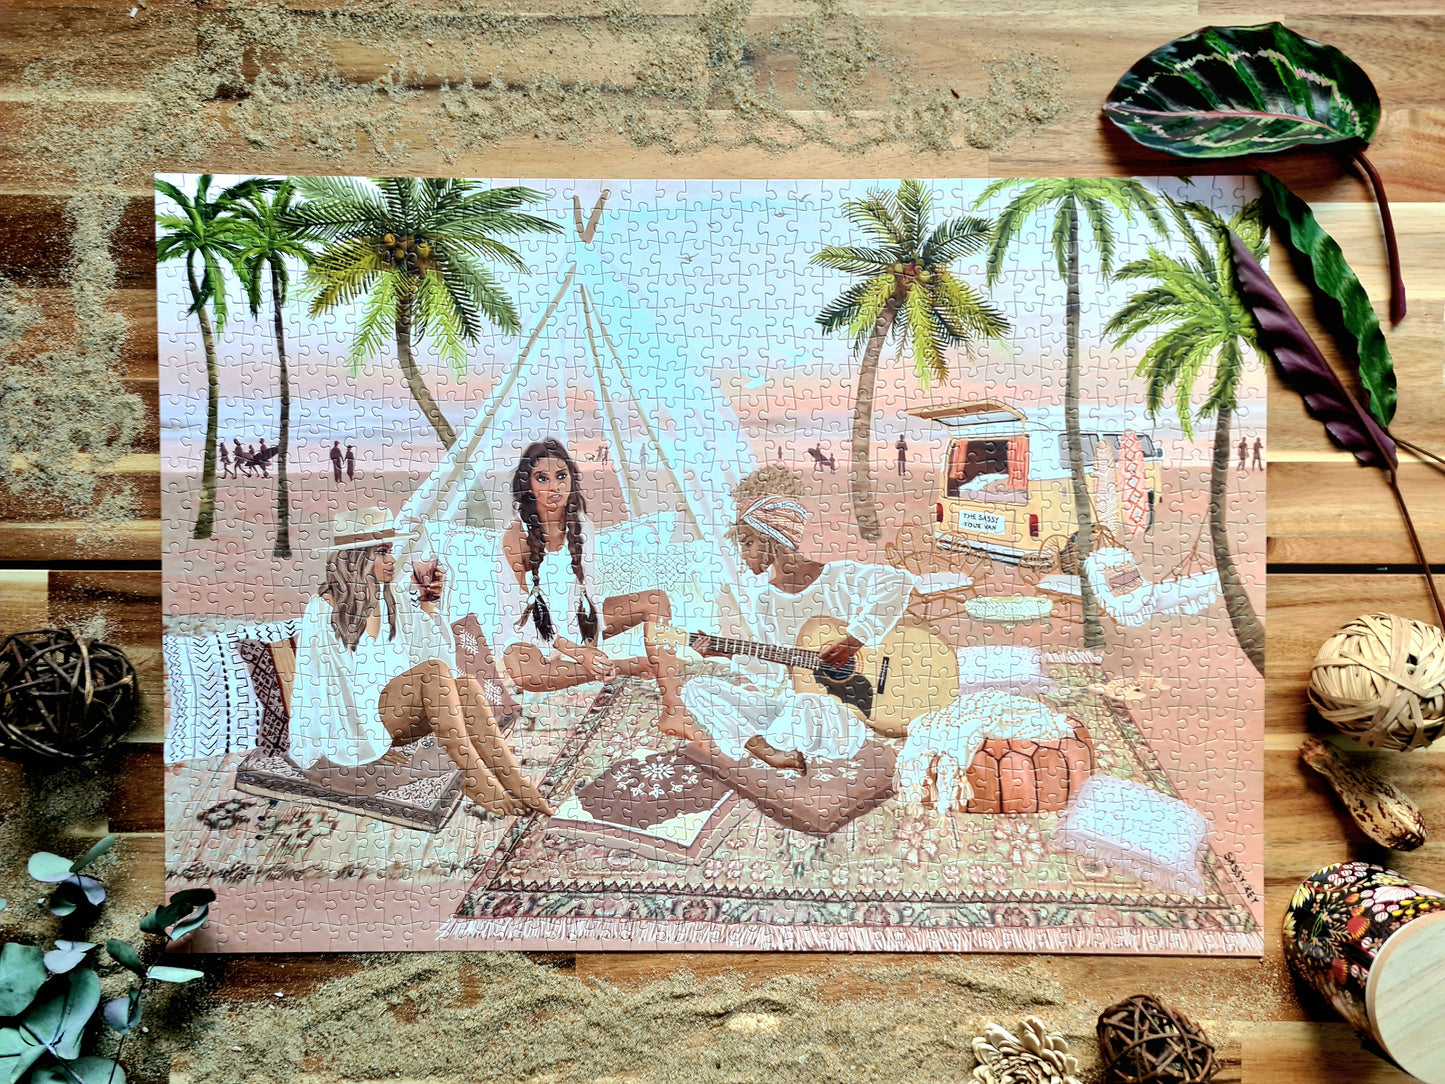 Puzzle n#11 "Bohemian Summer" 1000 pieces by Sarah Reyes